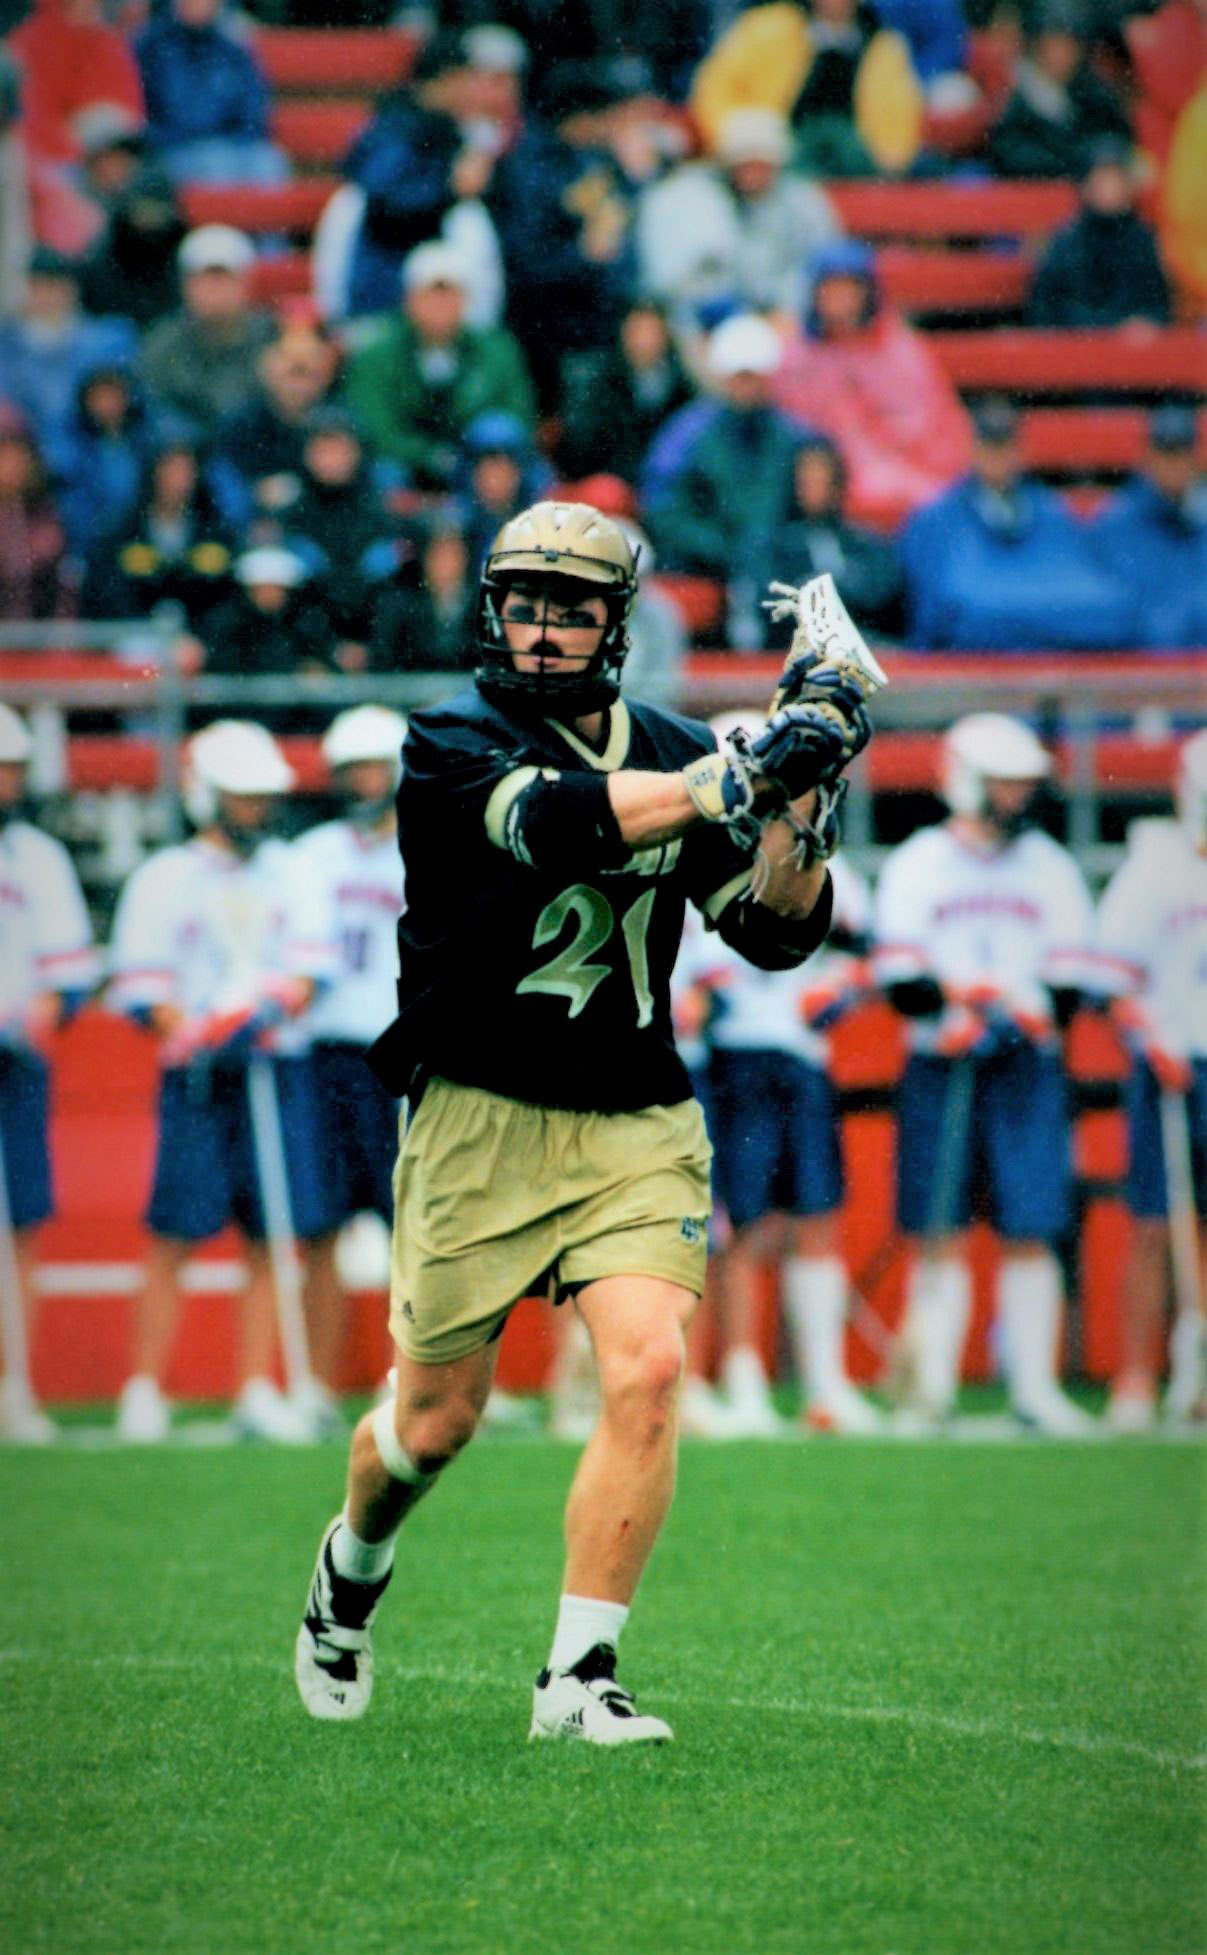 Chad DeBolt playing lacrosse for Notre Dame